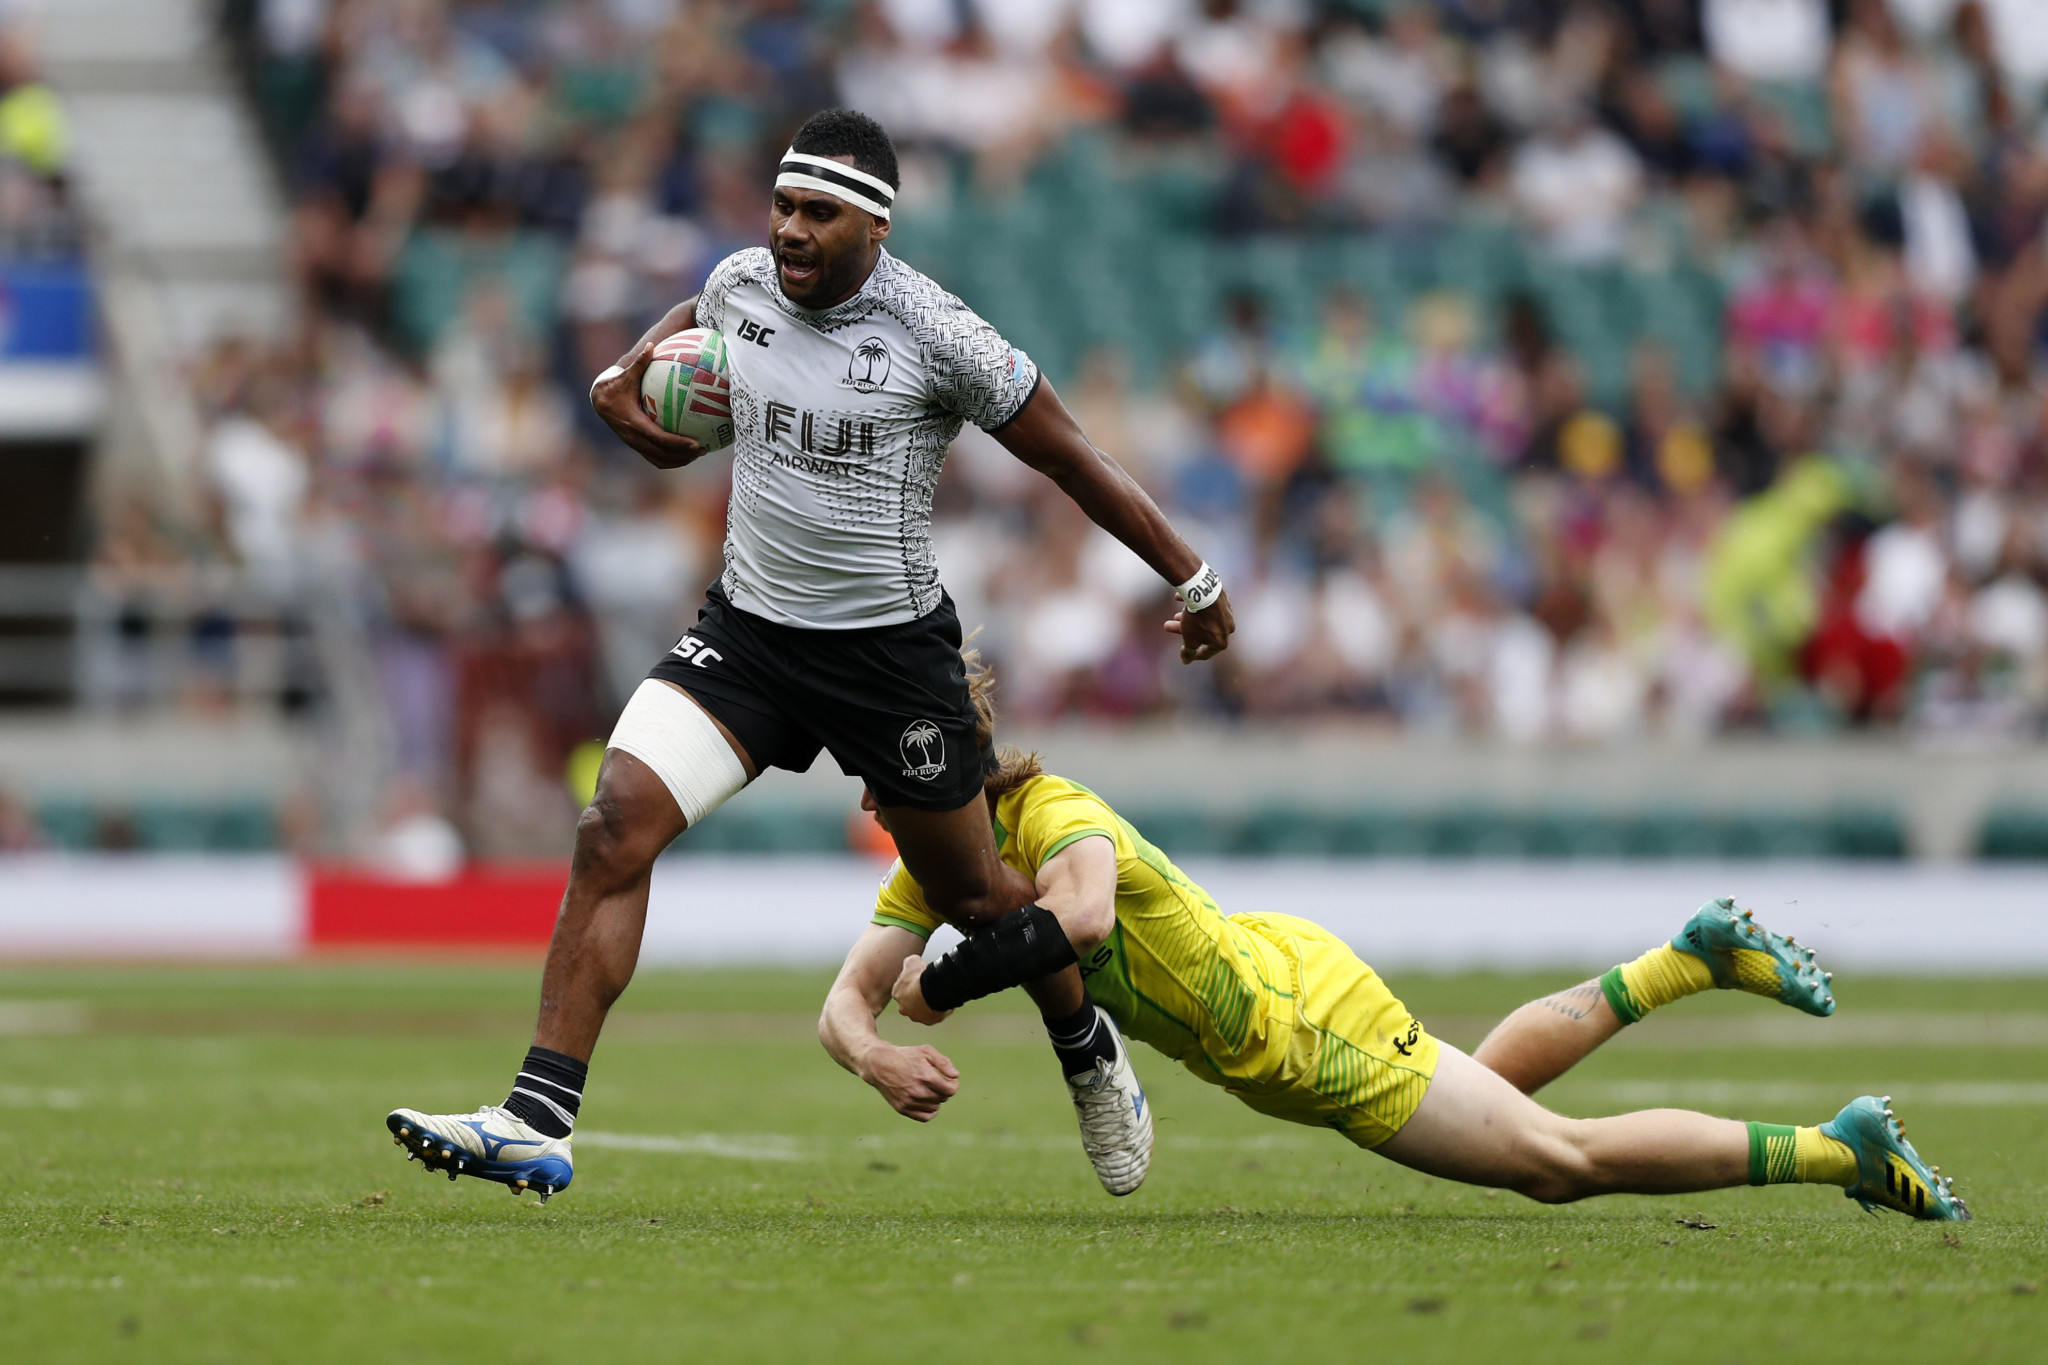 Olympic champions Fiji moved into the overall lead in the race for the World Rugby Sevens Series title ©Getty Images